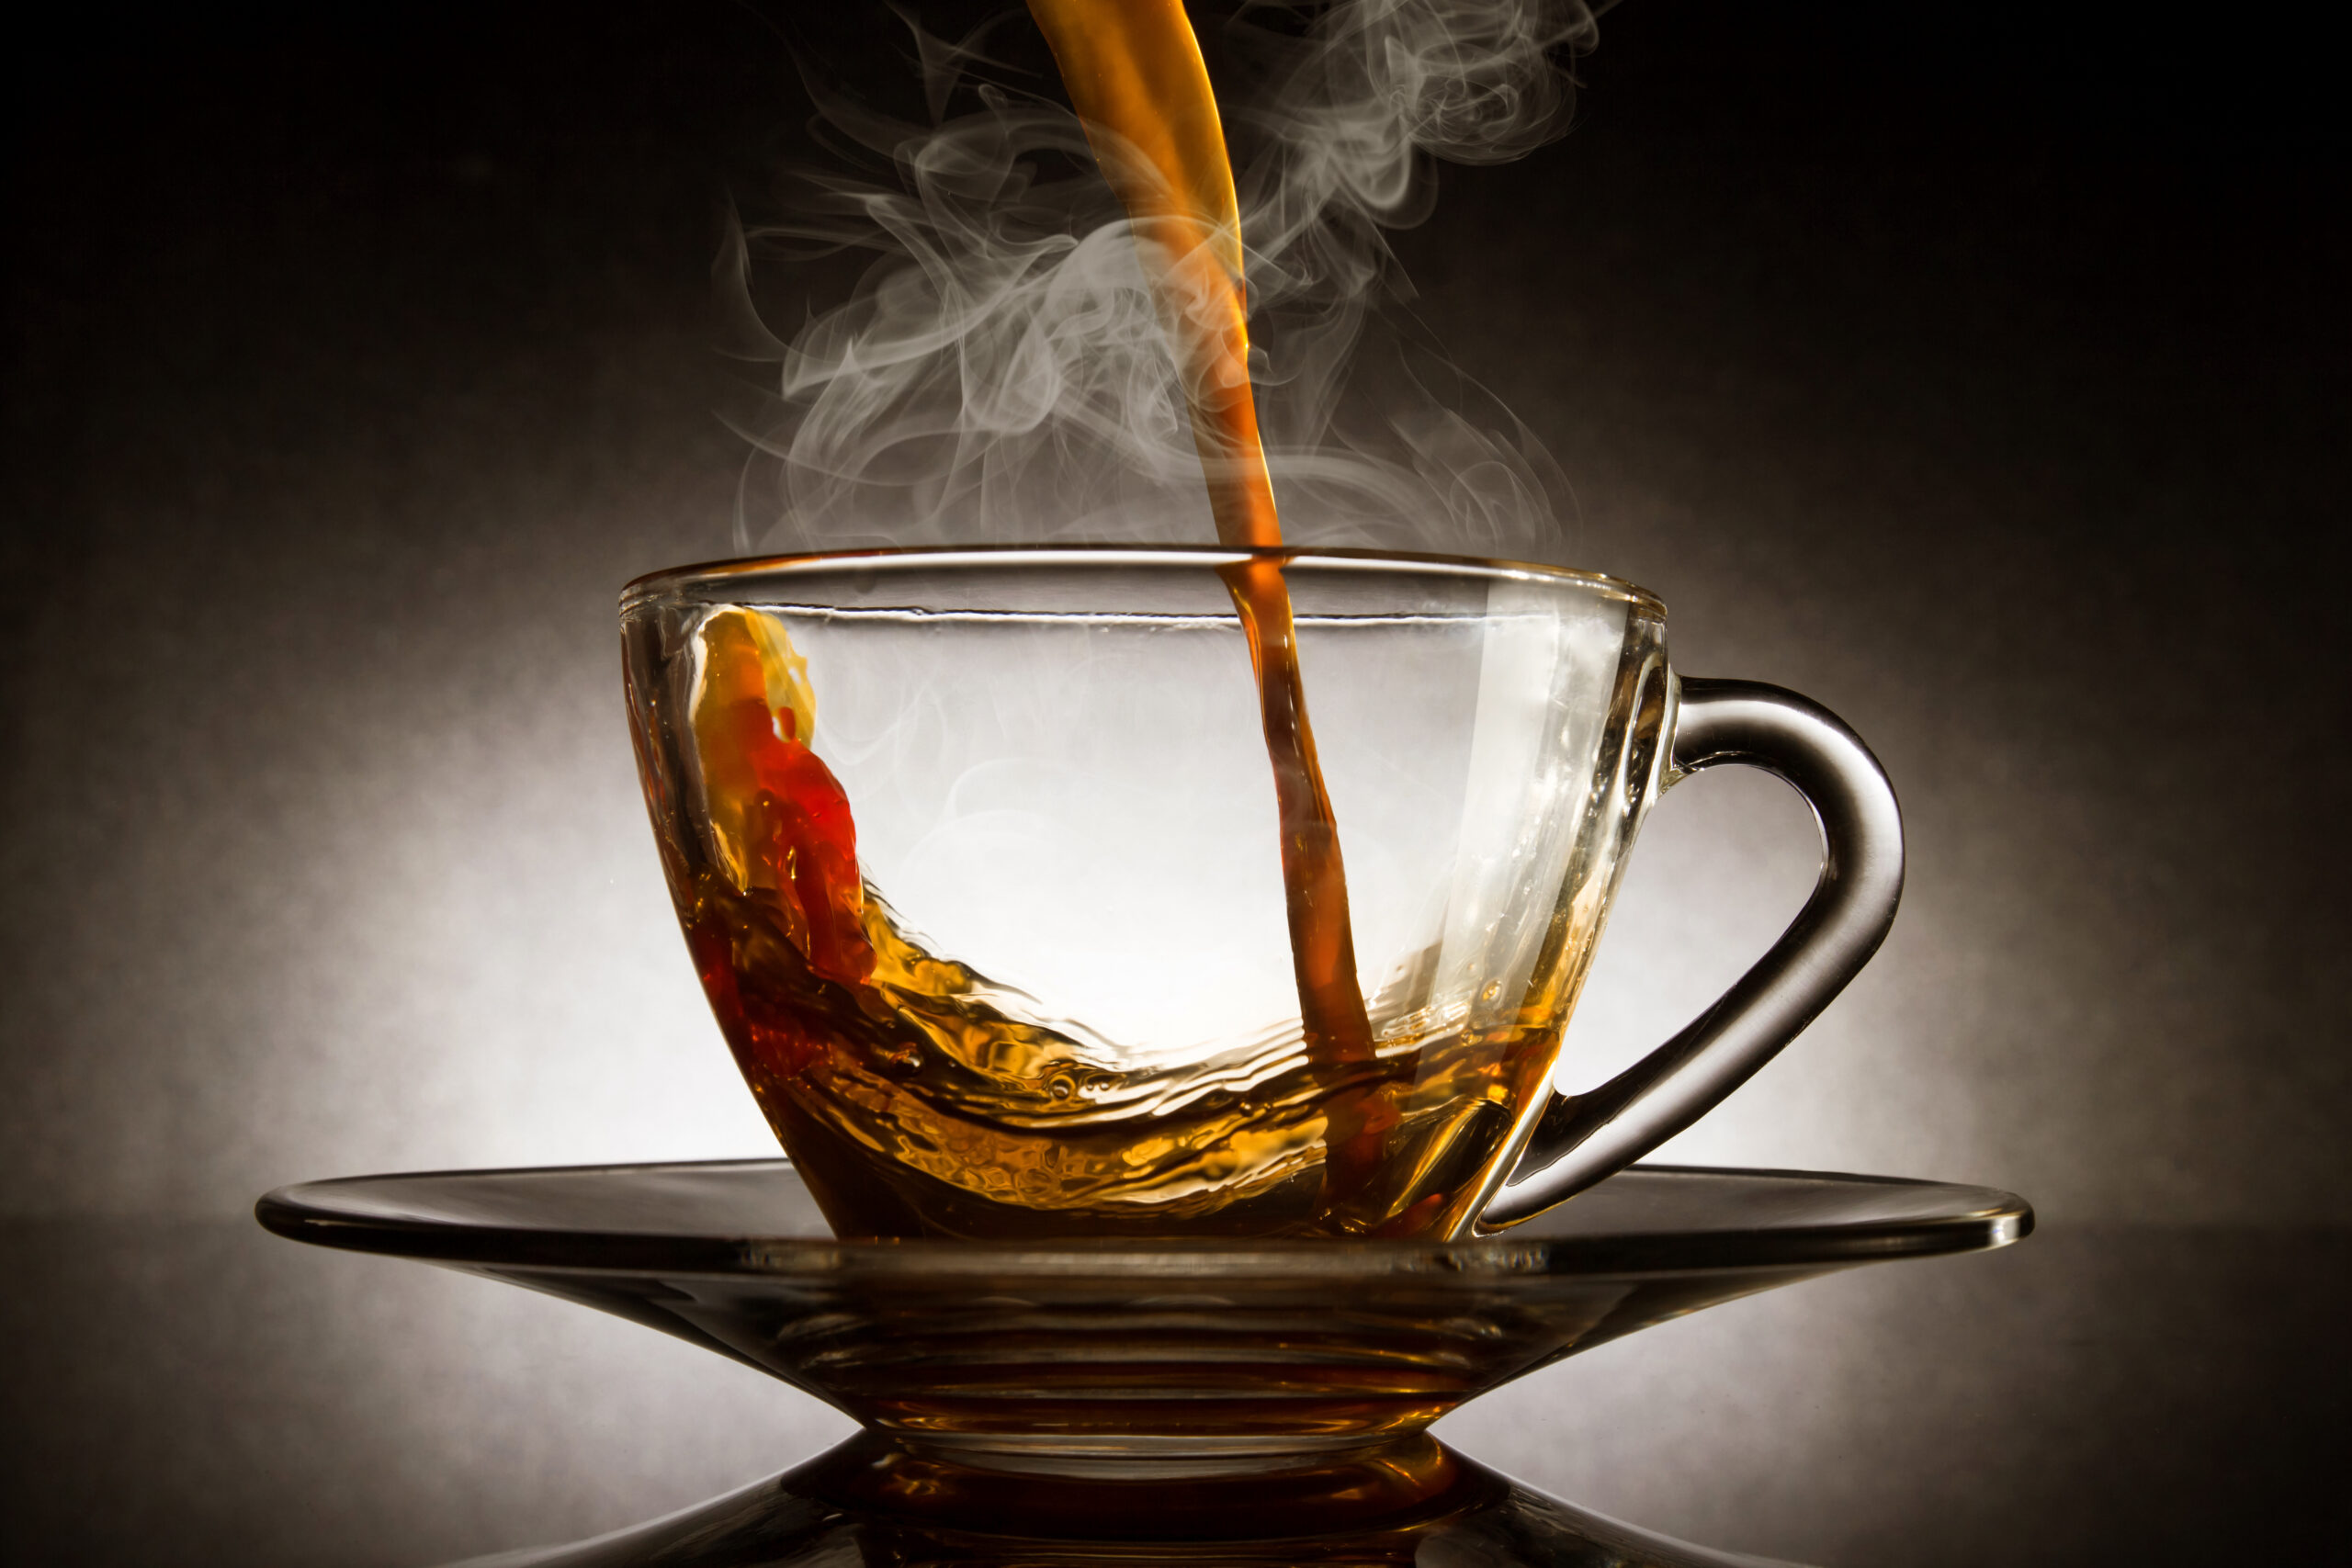 Pour coffee into transparent glass with steam cup on dark background.